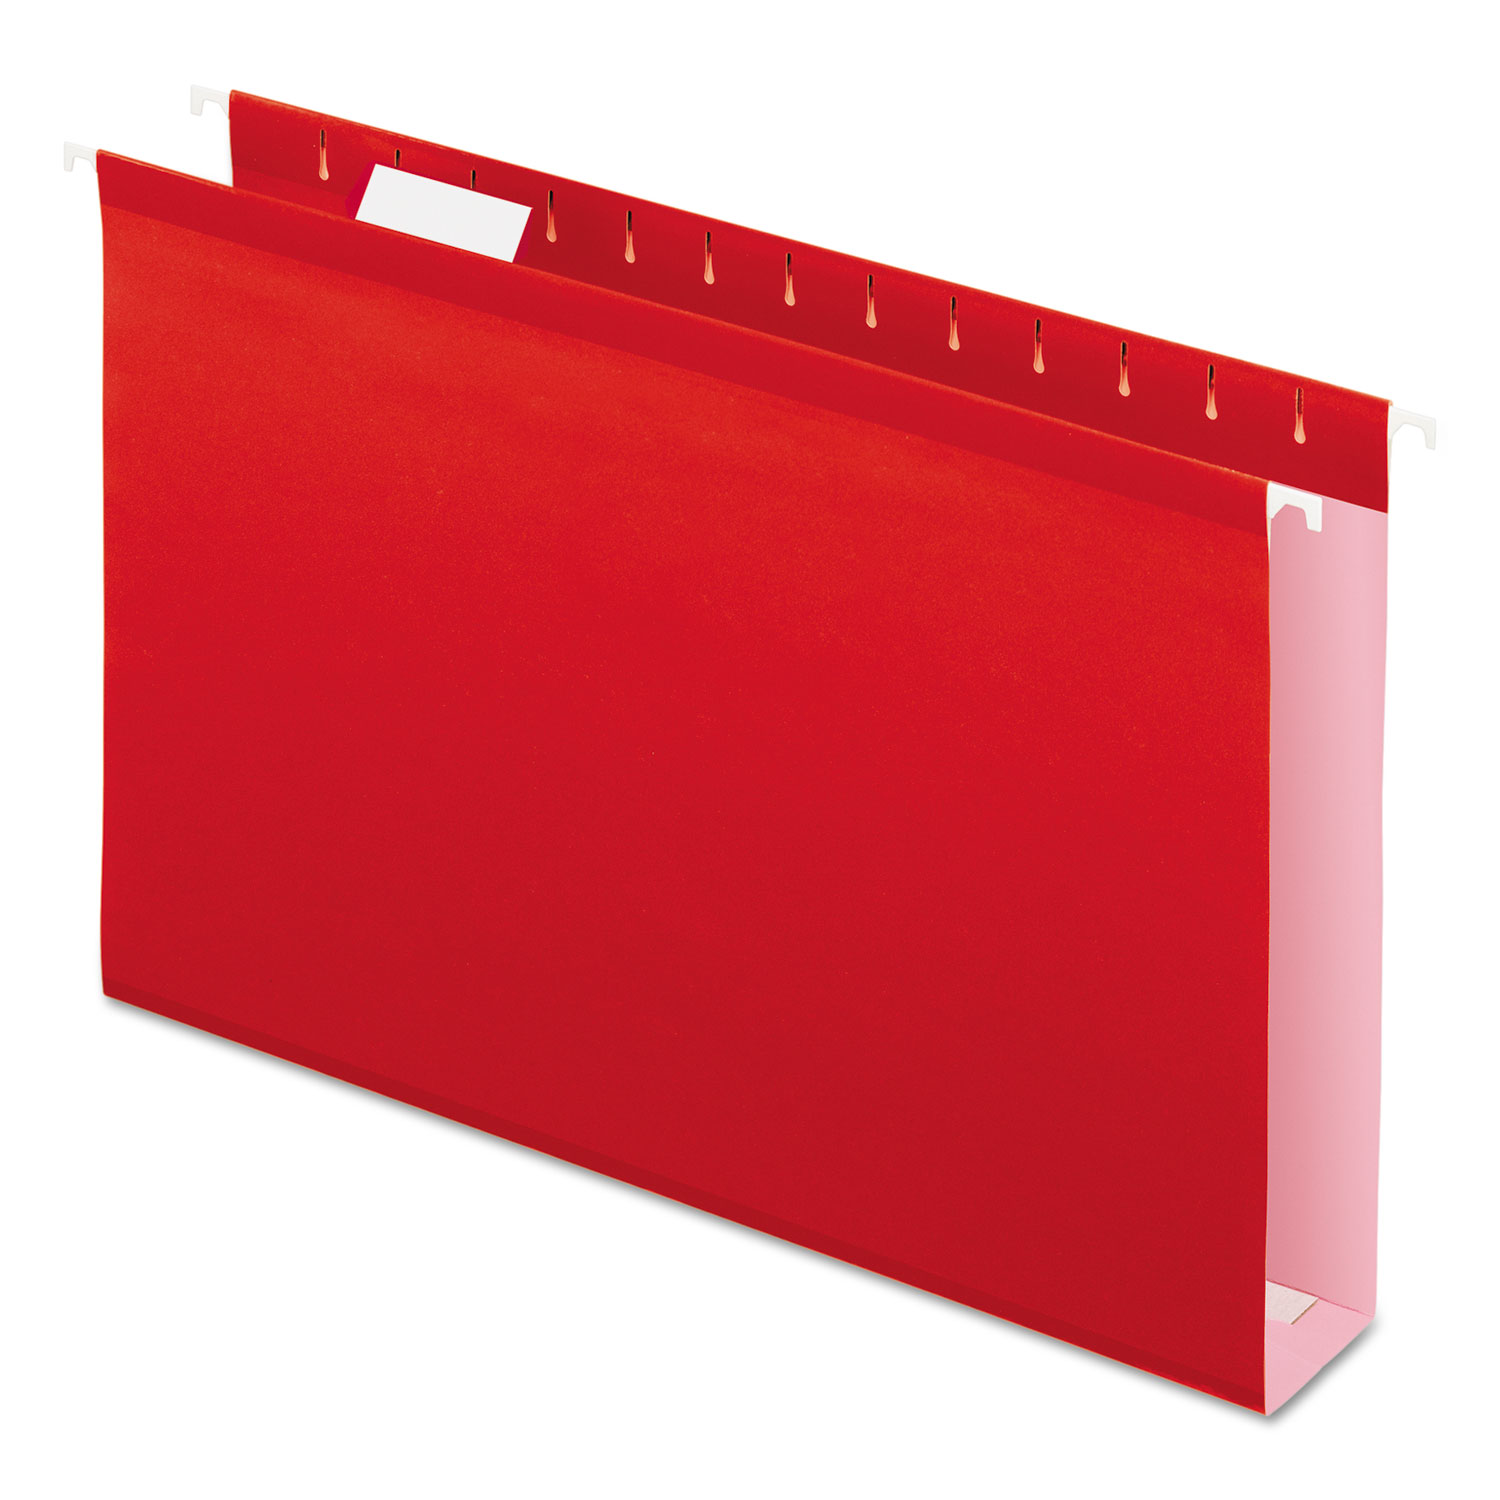  Pendaflex 04153X2 RED Extra Capacity Reinforced Hanging File Folders with Box Bottom, Legal Size, 1/5-Cut Tab, Red, 25/Box (PFX4153X2RED) 